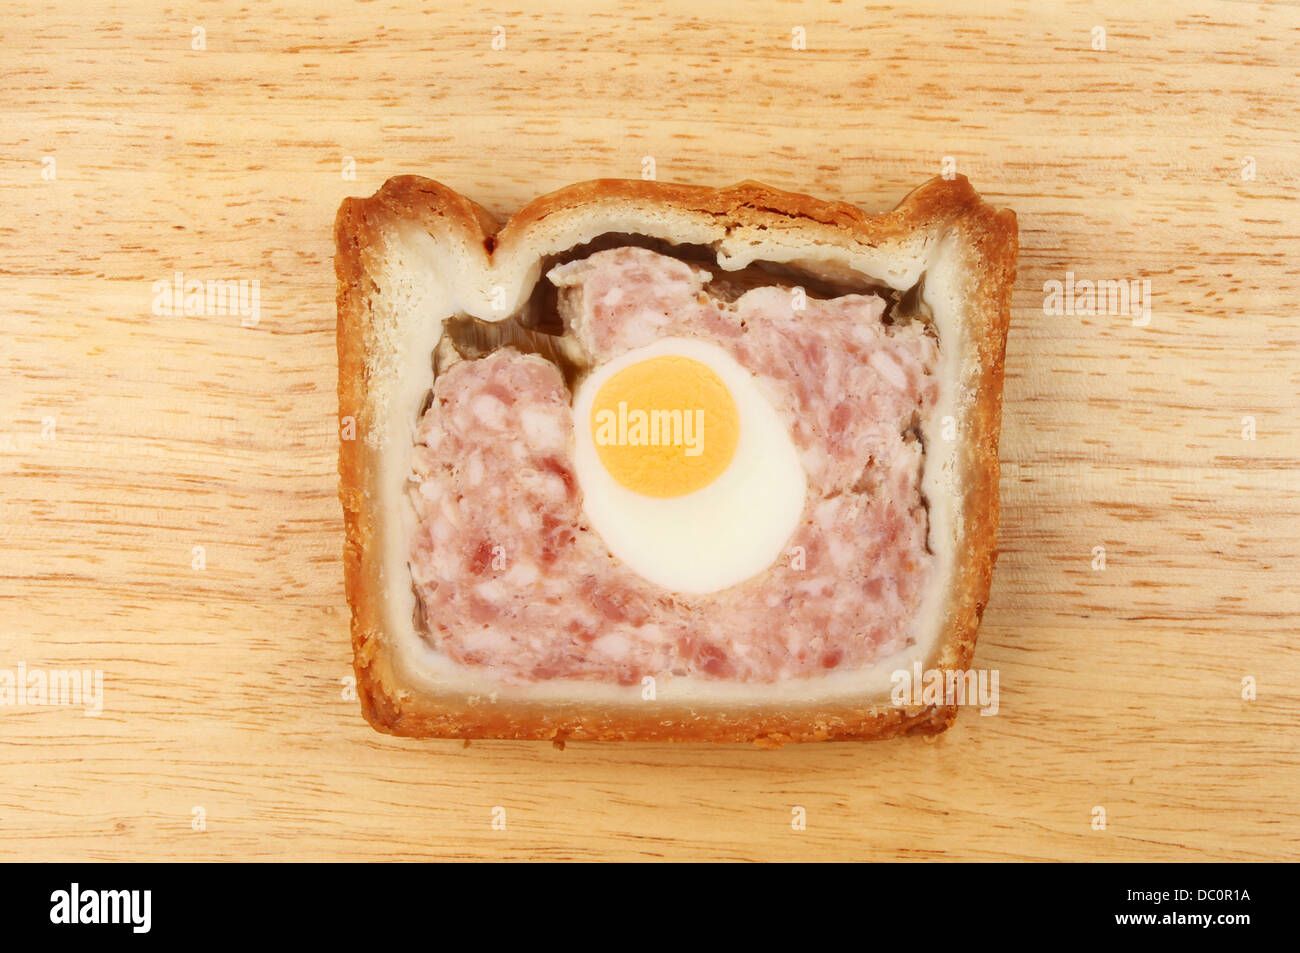 Slice of pork and egg gala pie on a wooden board Stock Photo